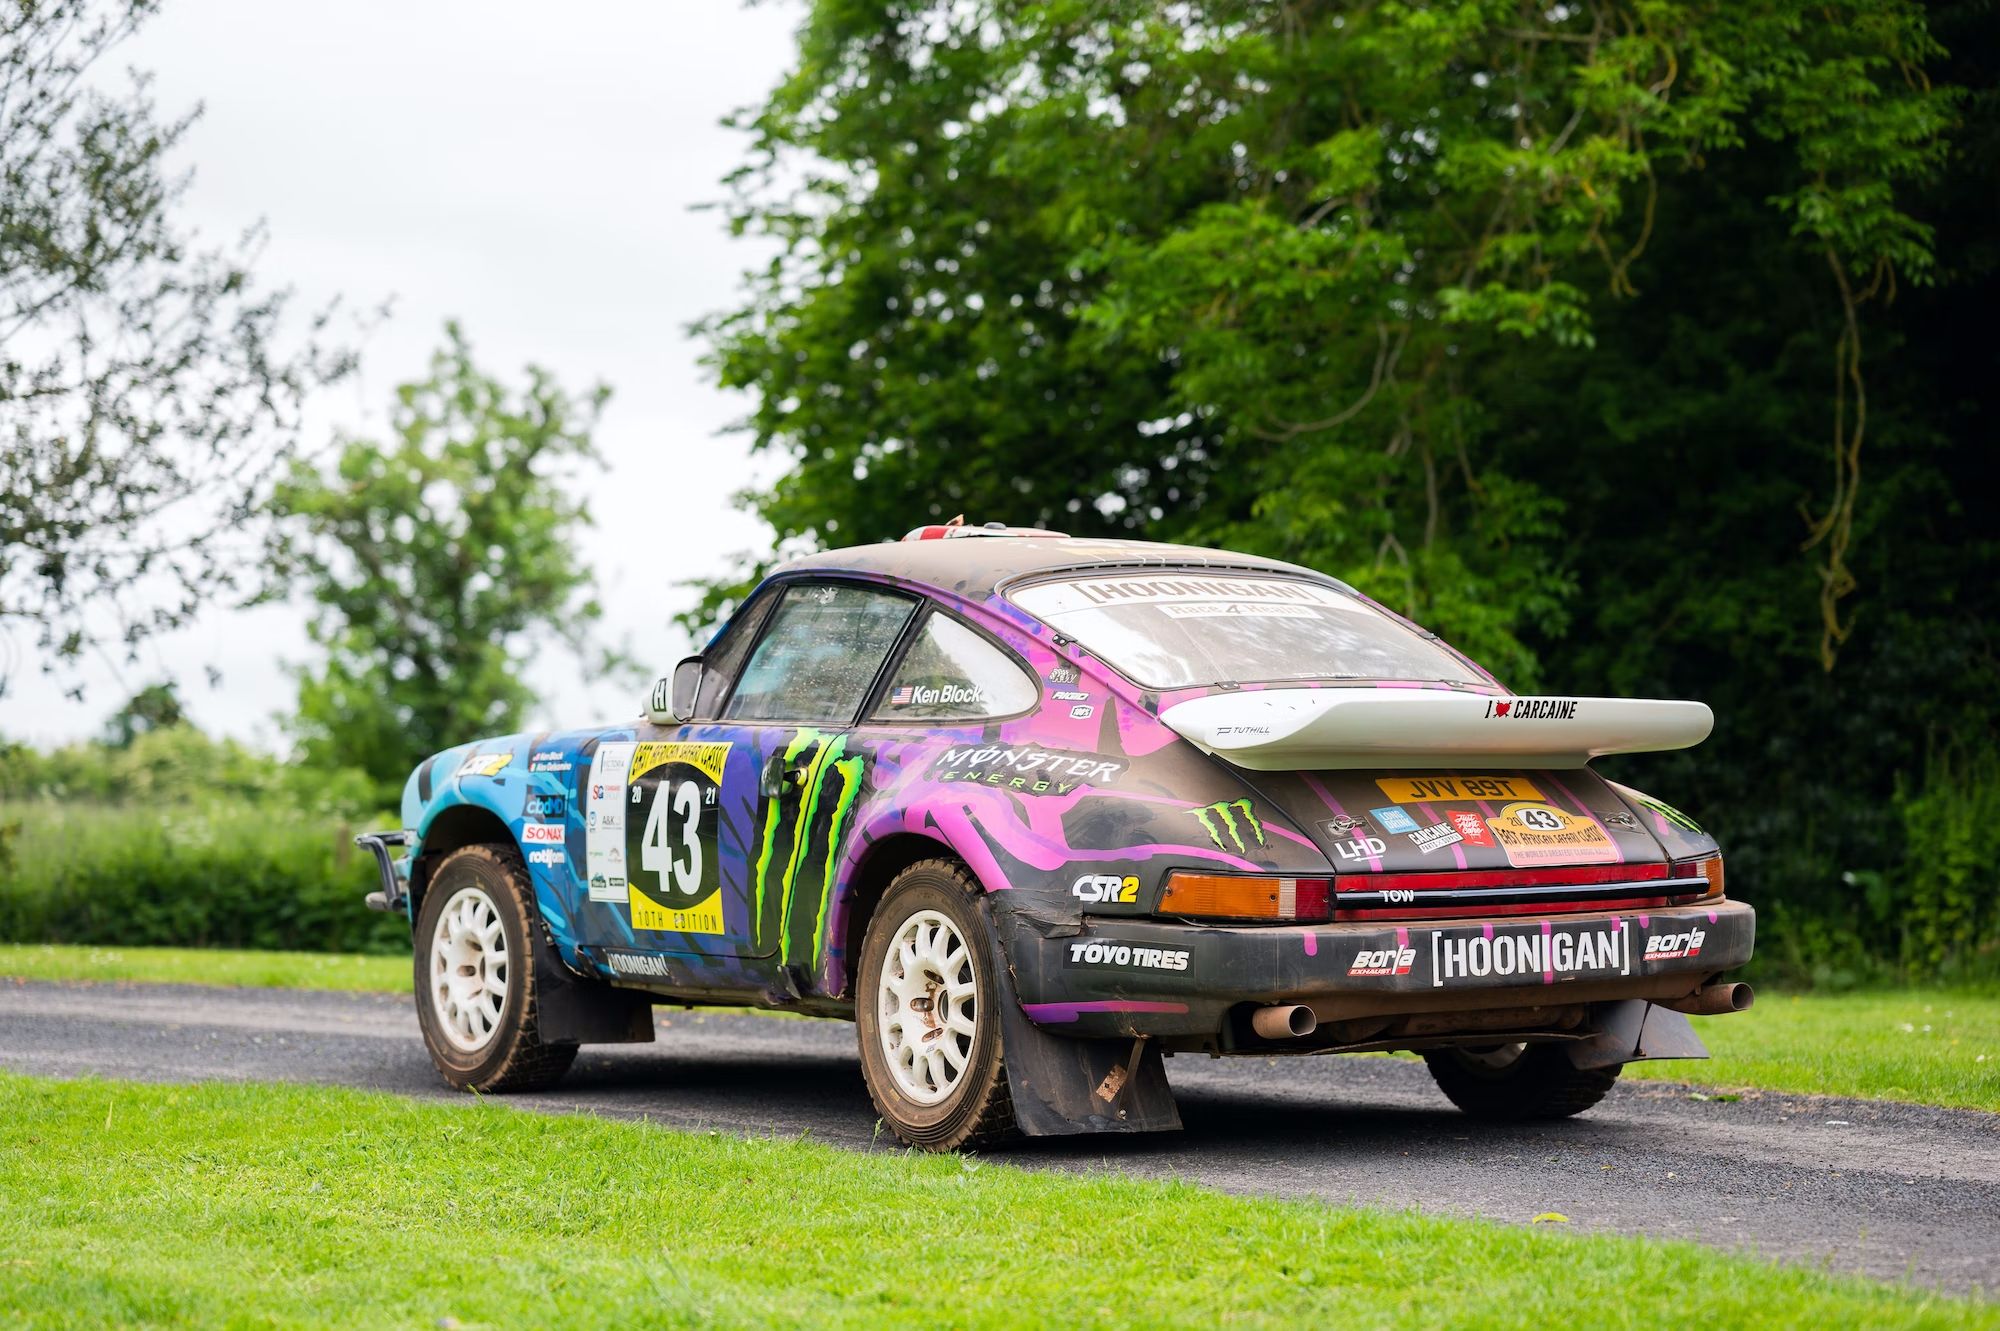 You can own and drive Ken Block's Porsche 911 Safari on the street